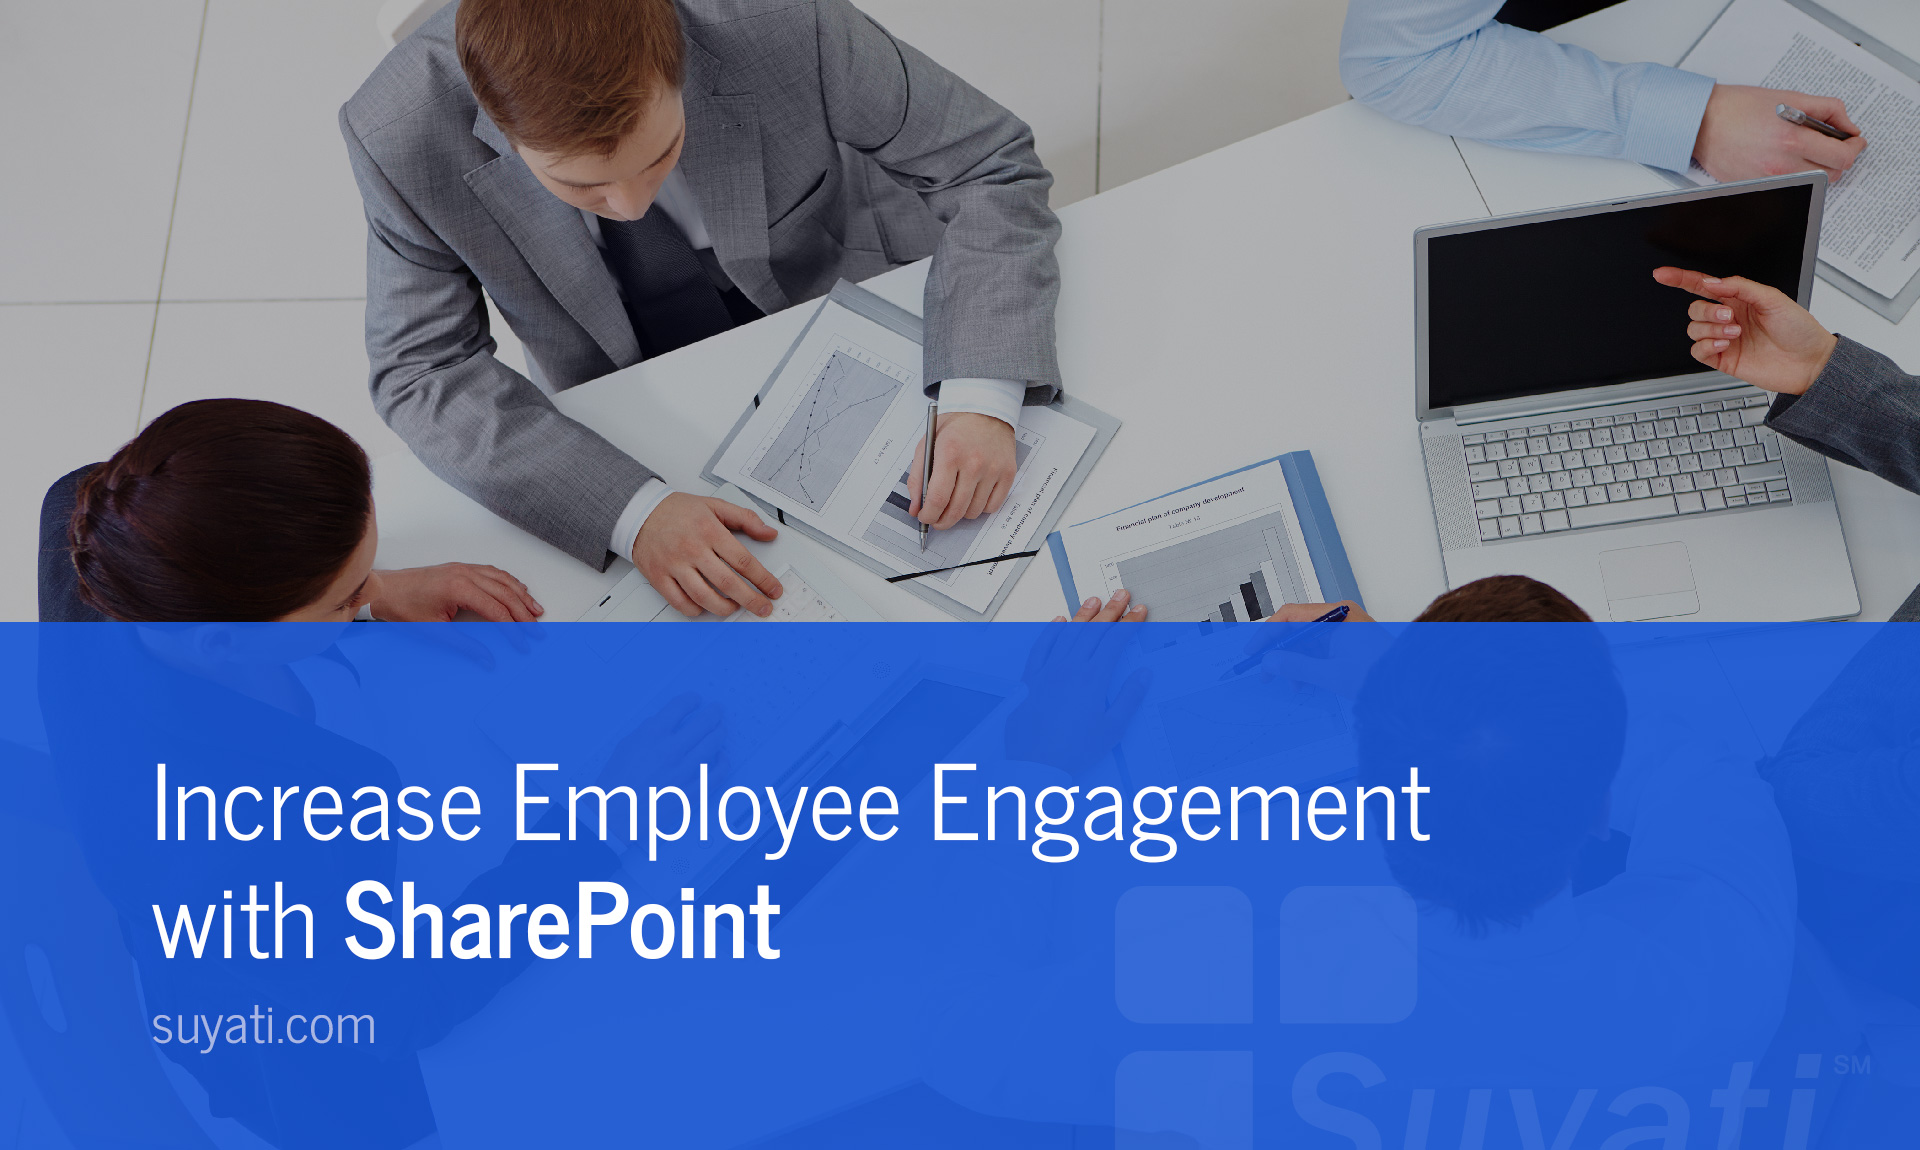 Employee Engagement with SharePoint